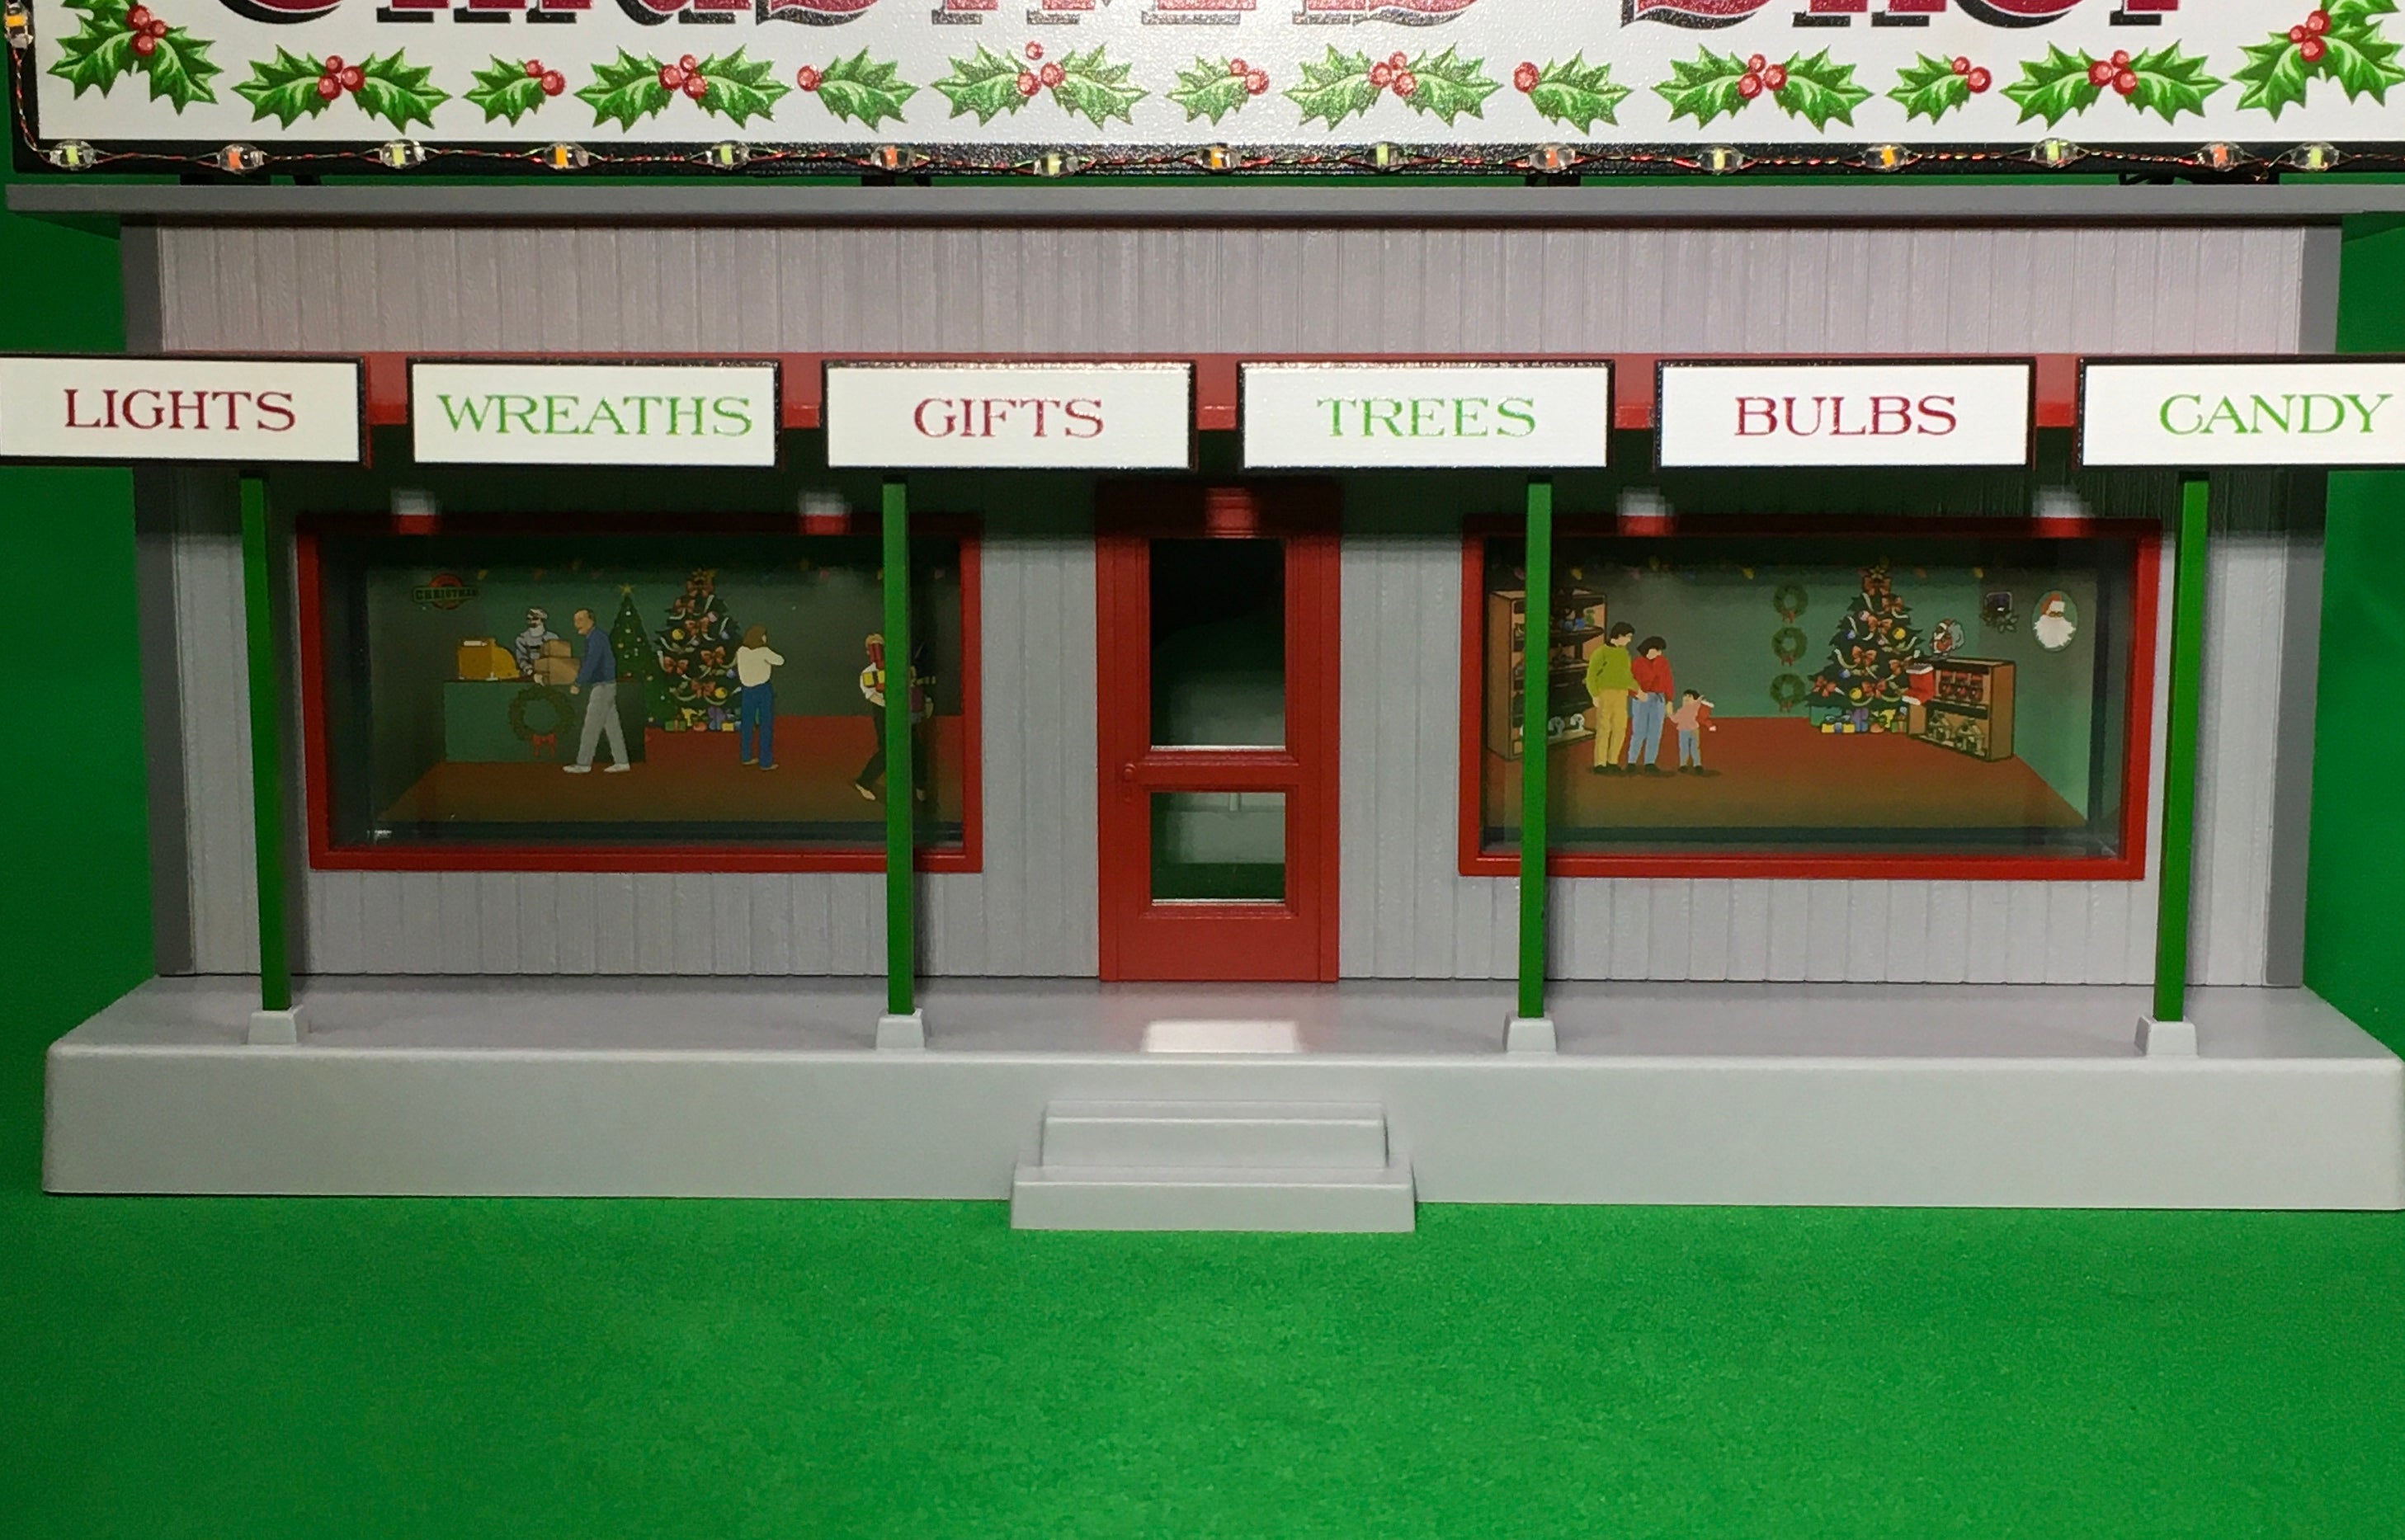 MTH 30-90637 - Road Side Stand "Ye Old Christmas Shop" w/ Operating Christmas Lights